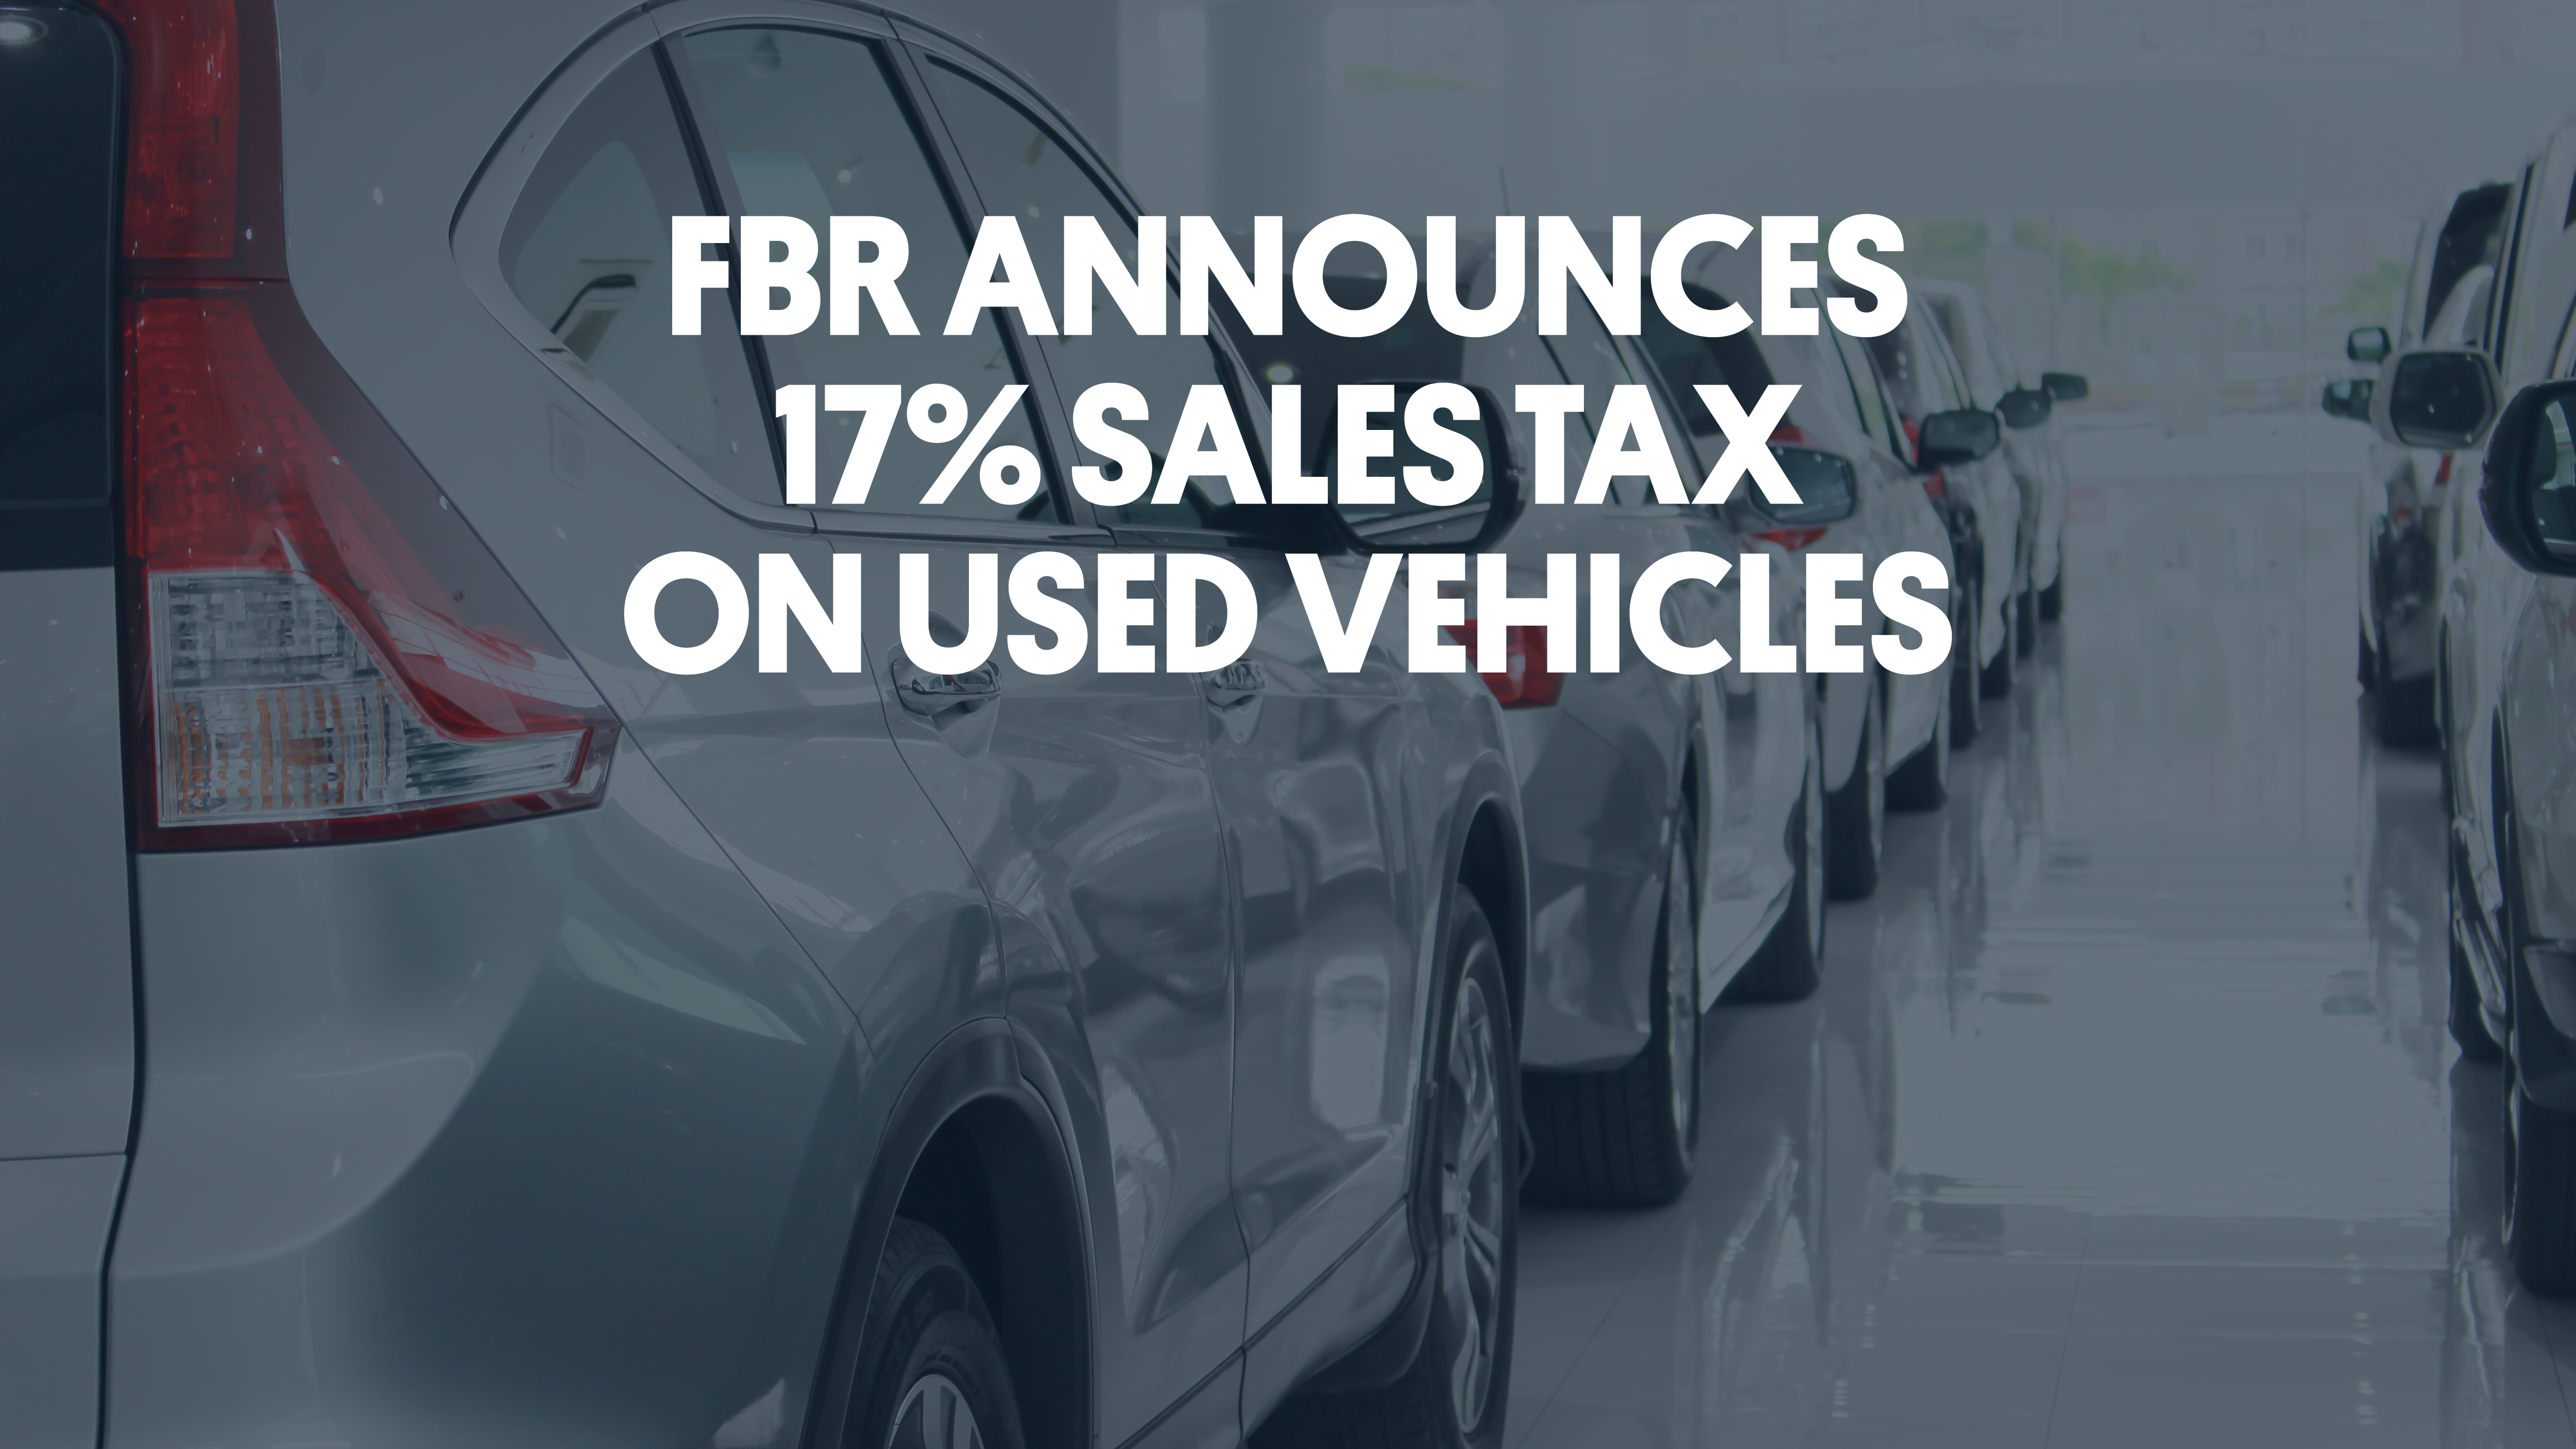 FBR Announces 17% Sales Tax on Used Vehicles